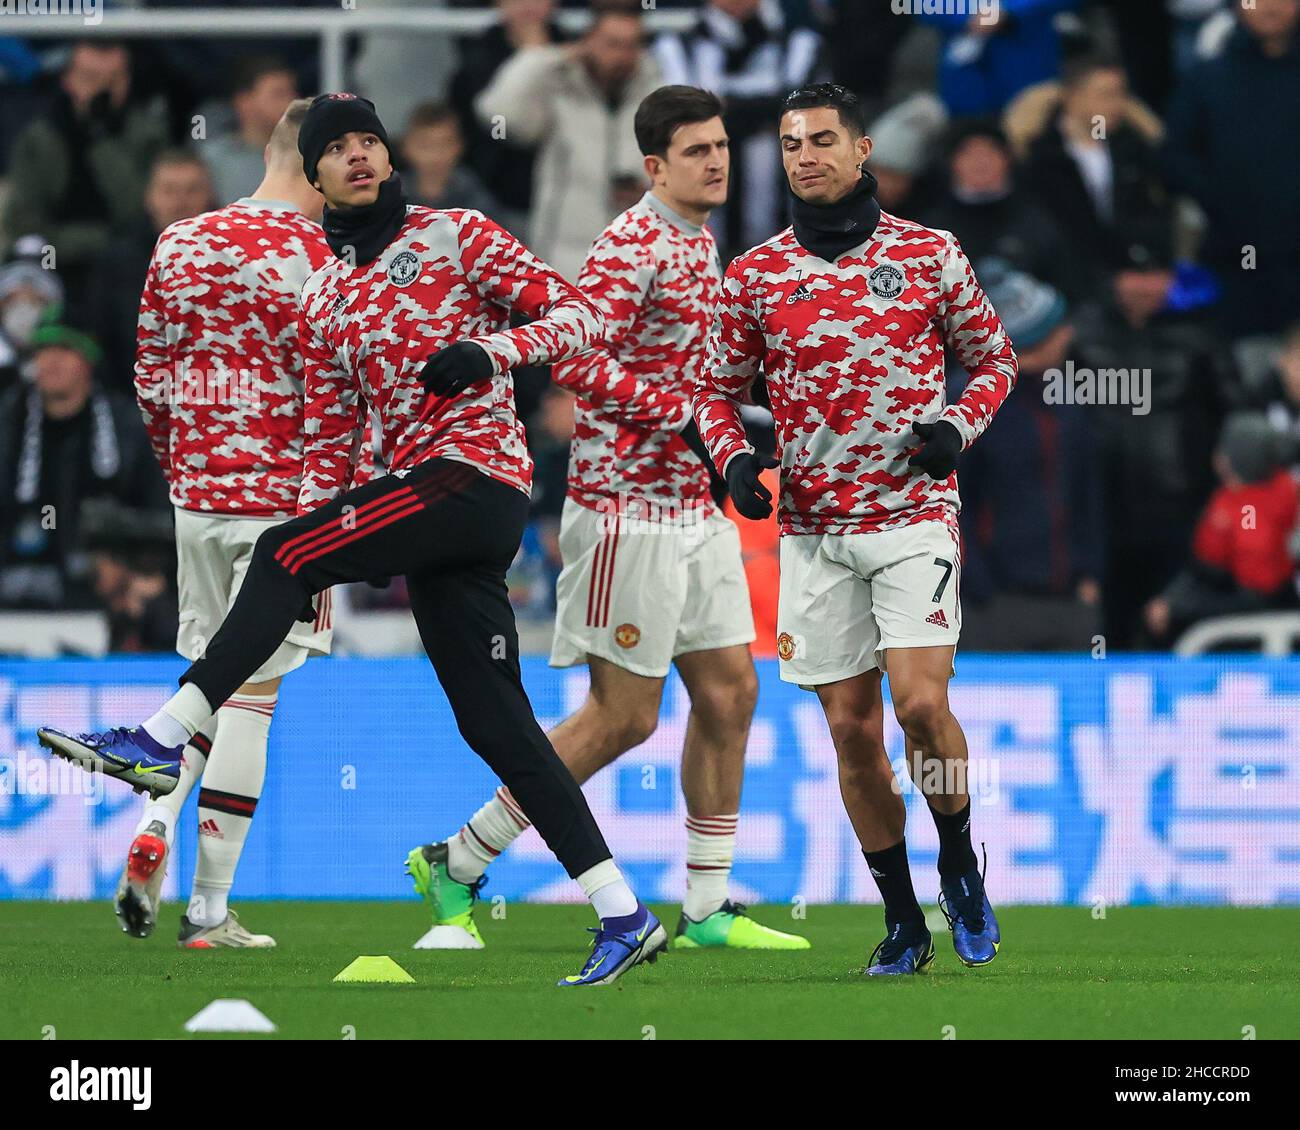 Cristiano Ronaldo #7 of Manchester United during the pre-game warmup in, on 12/27/2021. (Photo by Mark Cosgrove/News Images/Sipa USA) Credit: Sipa USA/Alamy Live News Stock Photo